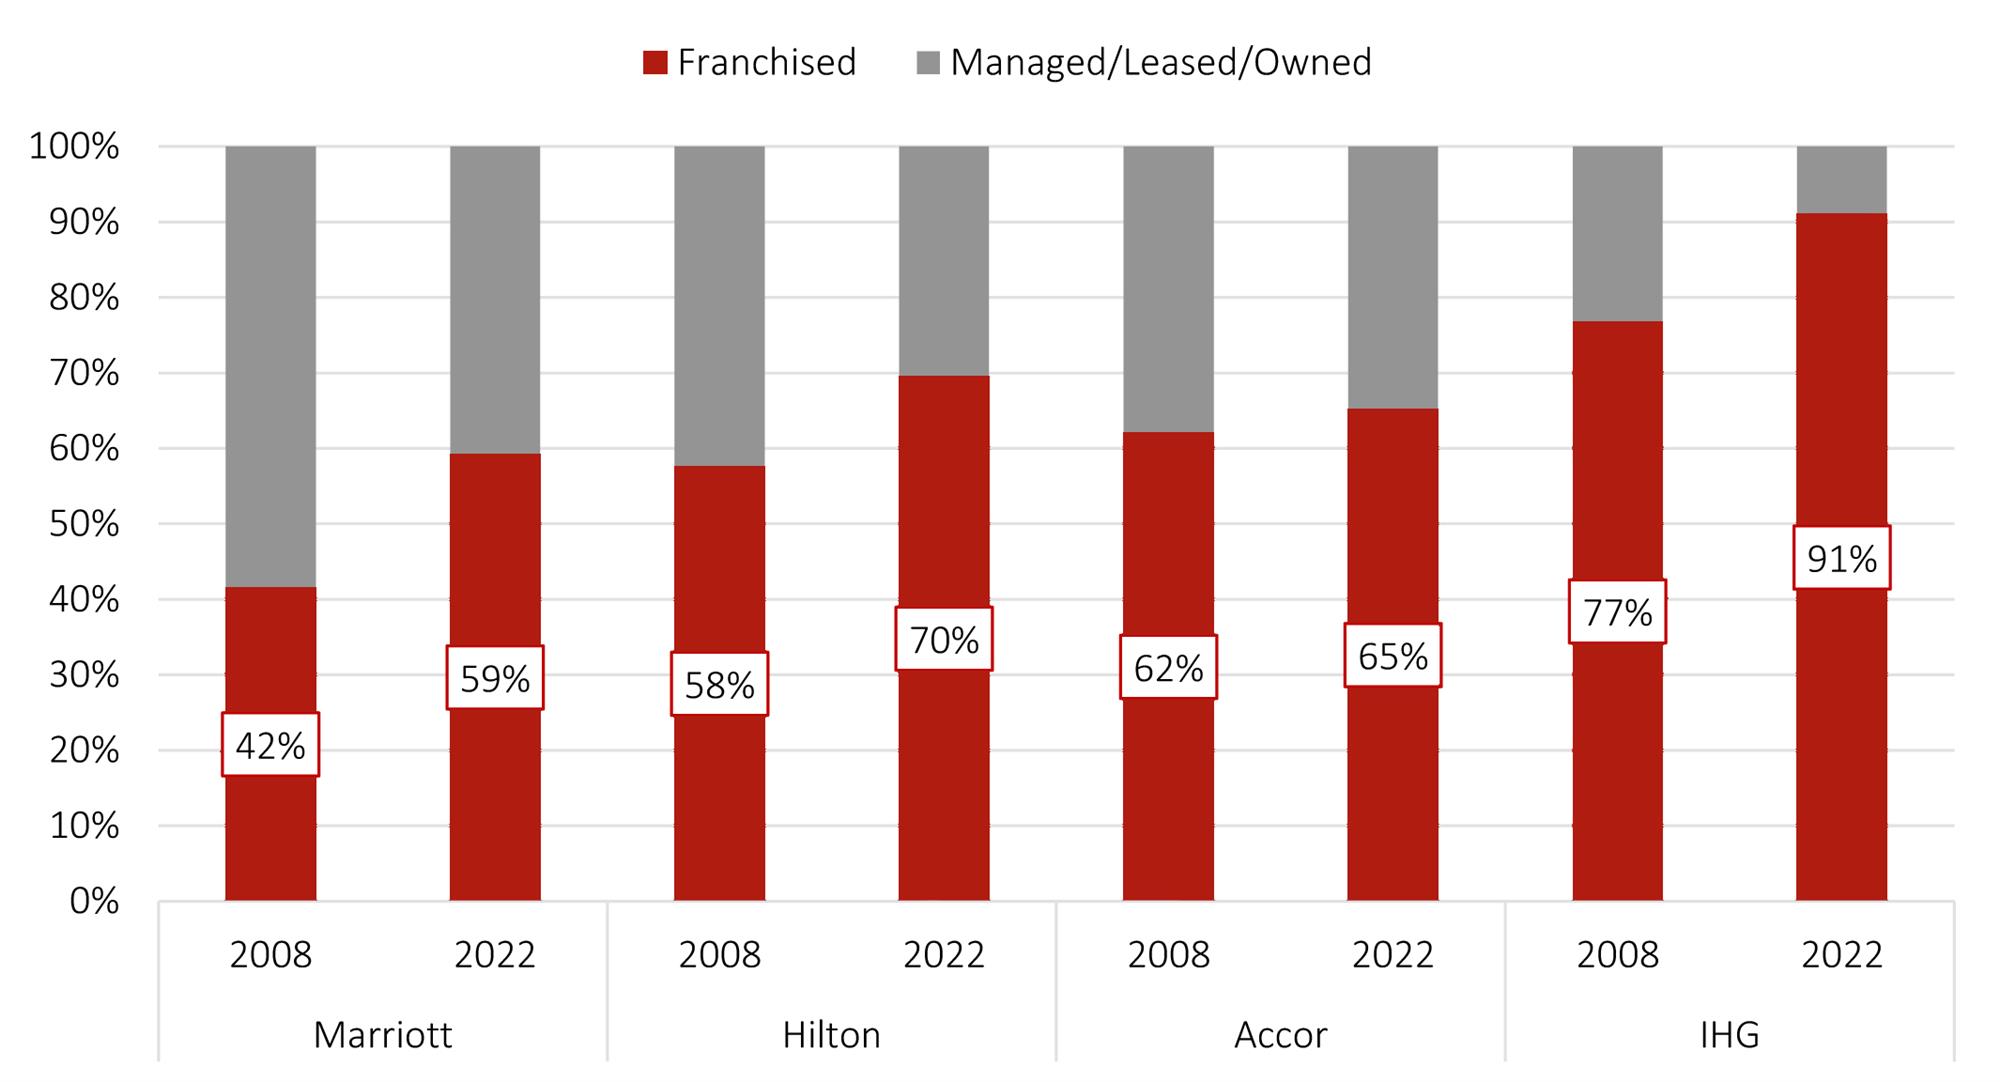 The Proportion of Franchised Hotels in Brands’ Portfolios in Europe